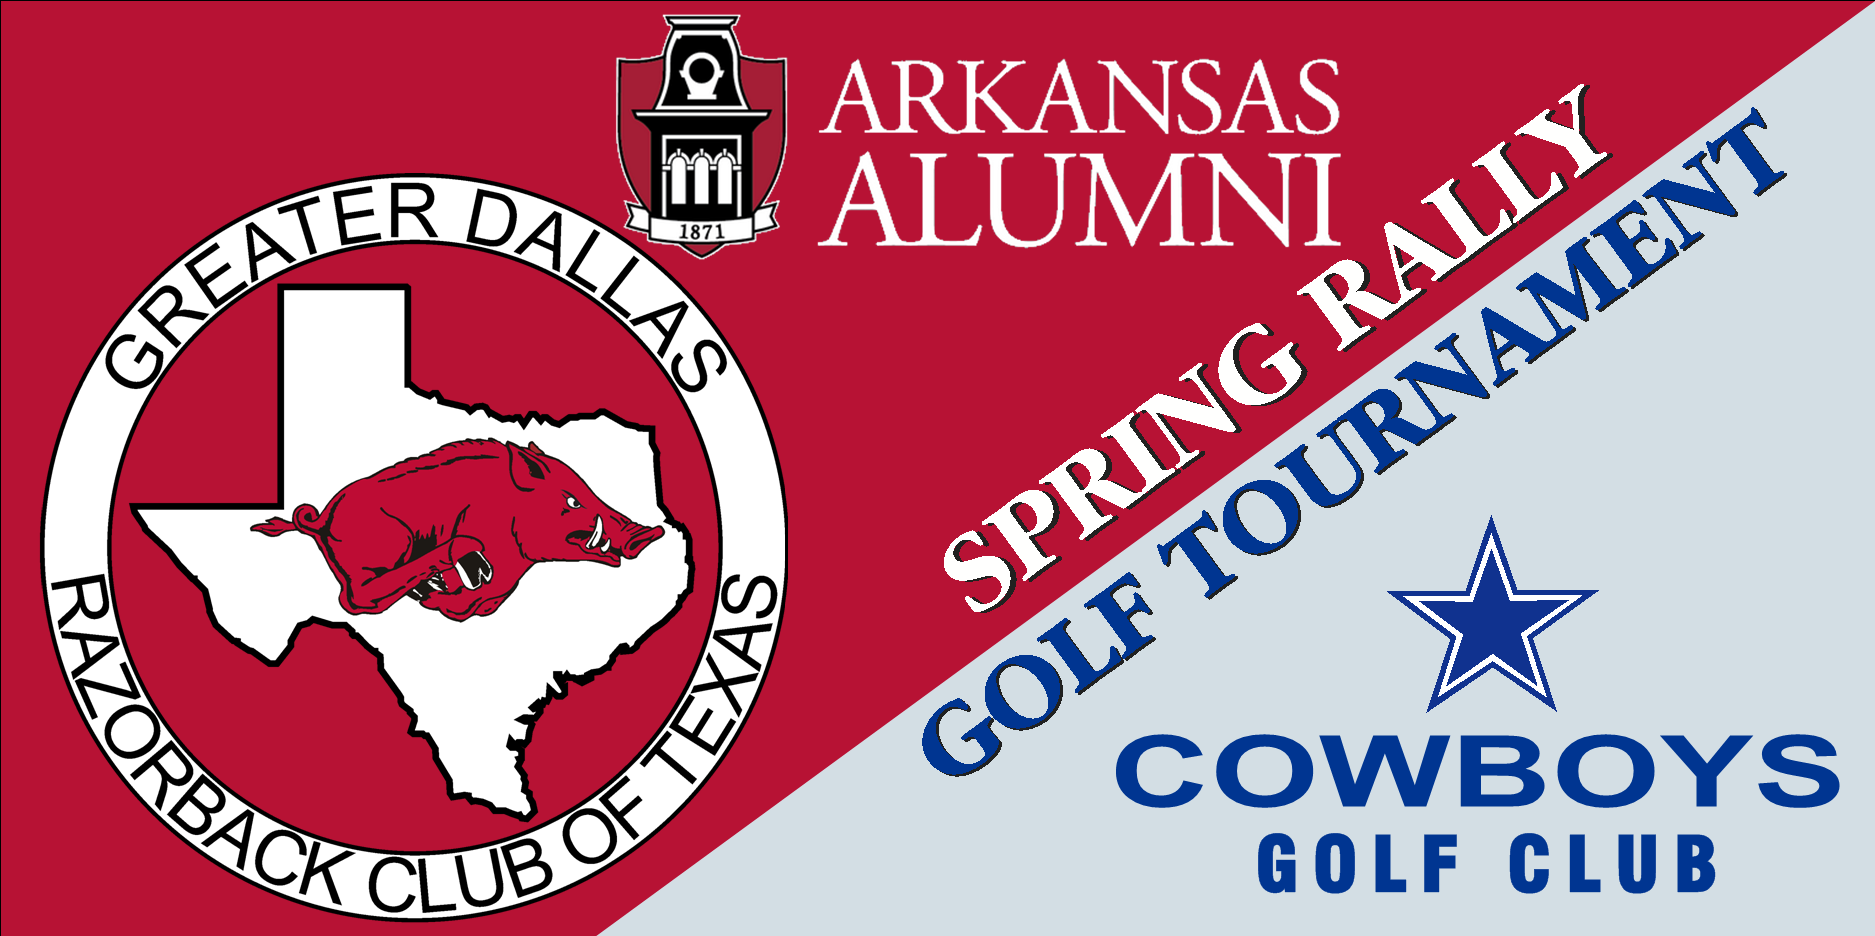 2020 Paul & Susan Henderson Golf Tournament & Spring Rally presented by the Greater Dallas Razorback Club and the Arkansas Alumni Association